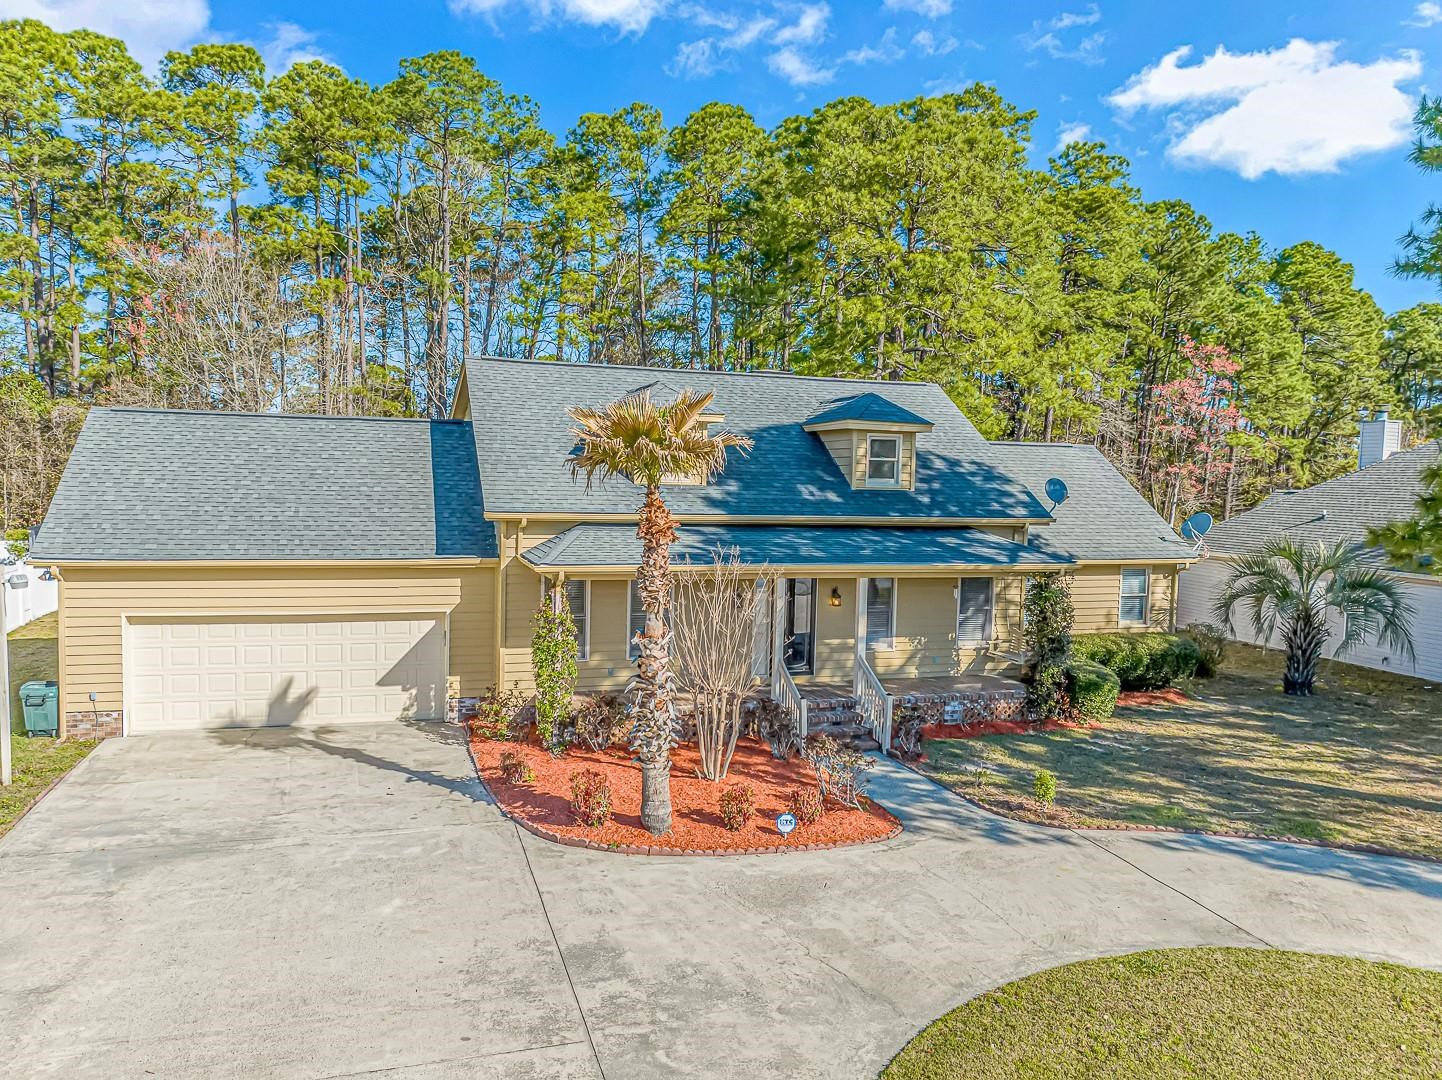 welcome home to this beautifully maintained 3-bedroom, 2.5 bath home located in the quiet and desirable coastal heights neighborhood.  this one of a kind home home sits on .35 acres with a huge yard that backs up to the 8th hole of  the prestigious hackler course at ccu. this quintessential home is not a cookie cutter or bland home and comes with many nooks and crannies.  truly unique and features a circular driveway with plentiful parking for hosting, 2 car garage, inviting front porch, beautiful wooden staircase,  dormer windows, formal dining room, kitchen/breakfast bar, stainless steel appliances with a gas range, gas fireplace, 1st level has new hvac, 2nd level fairly new, voluntary hoa, many updates and much more.  centrally located with easy access to major roads, conway and myrtle beach, minutes to the ccu, hgtc, conway medical center, dining, shopping, entertainment and a short drive to the beaches.  perfect for a primary, retirement, rental or vacation home. square footage is approximate and not guaranteed. buyer responsible for verification.